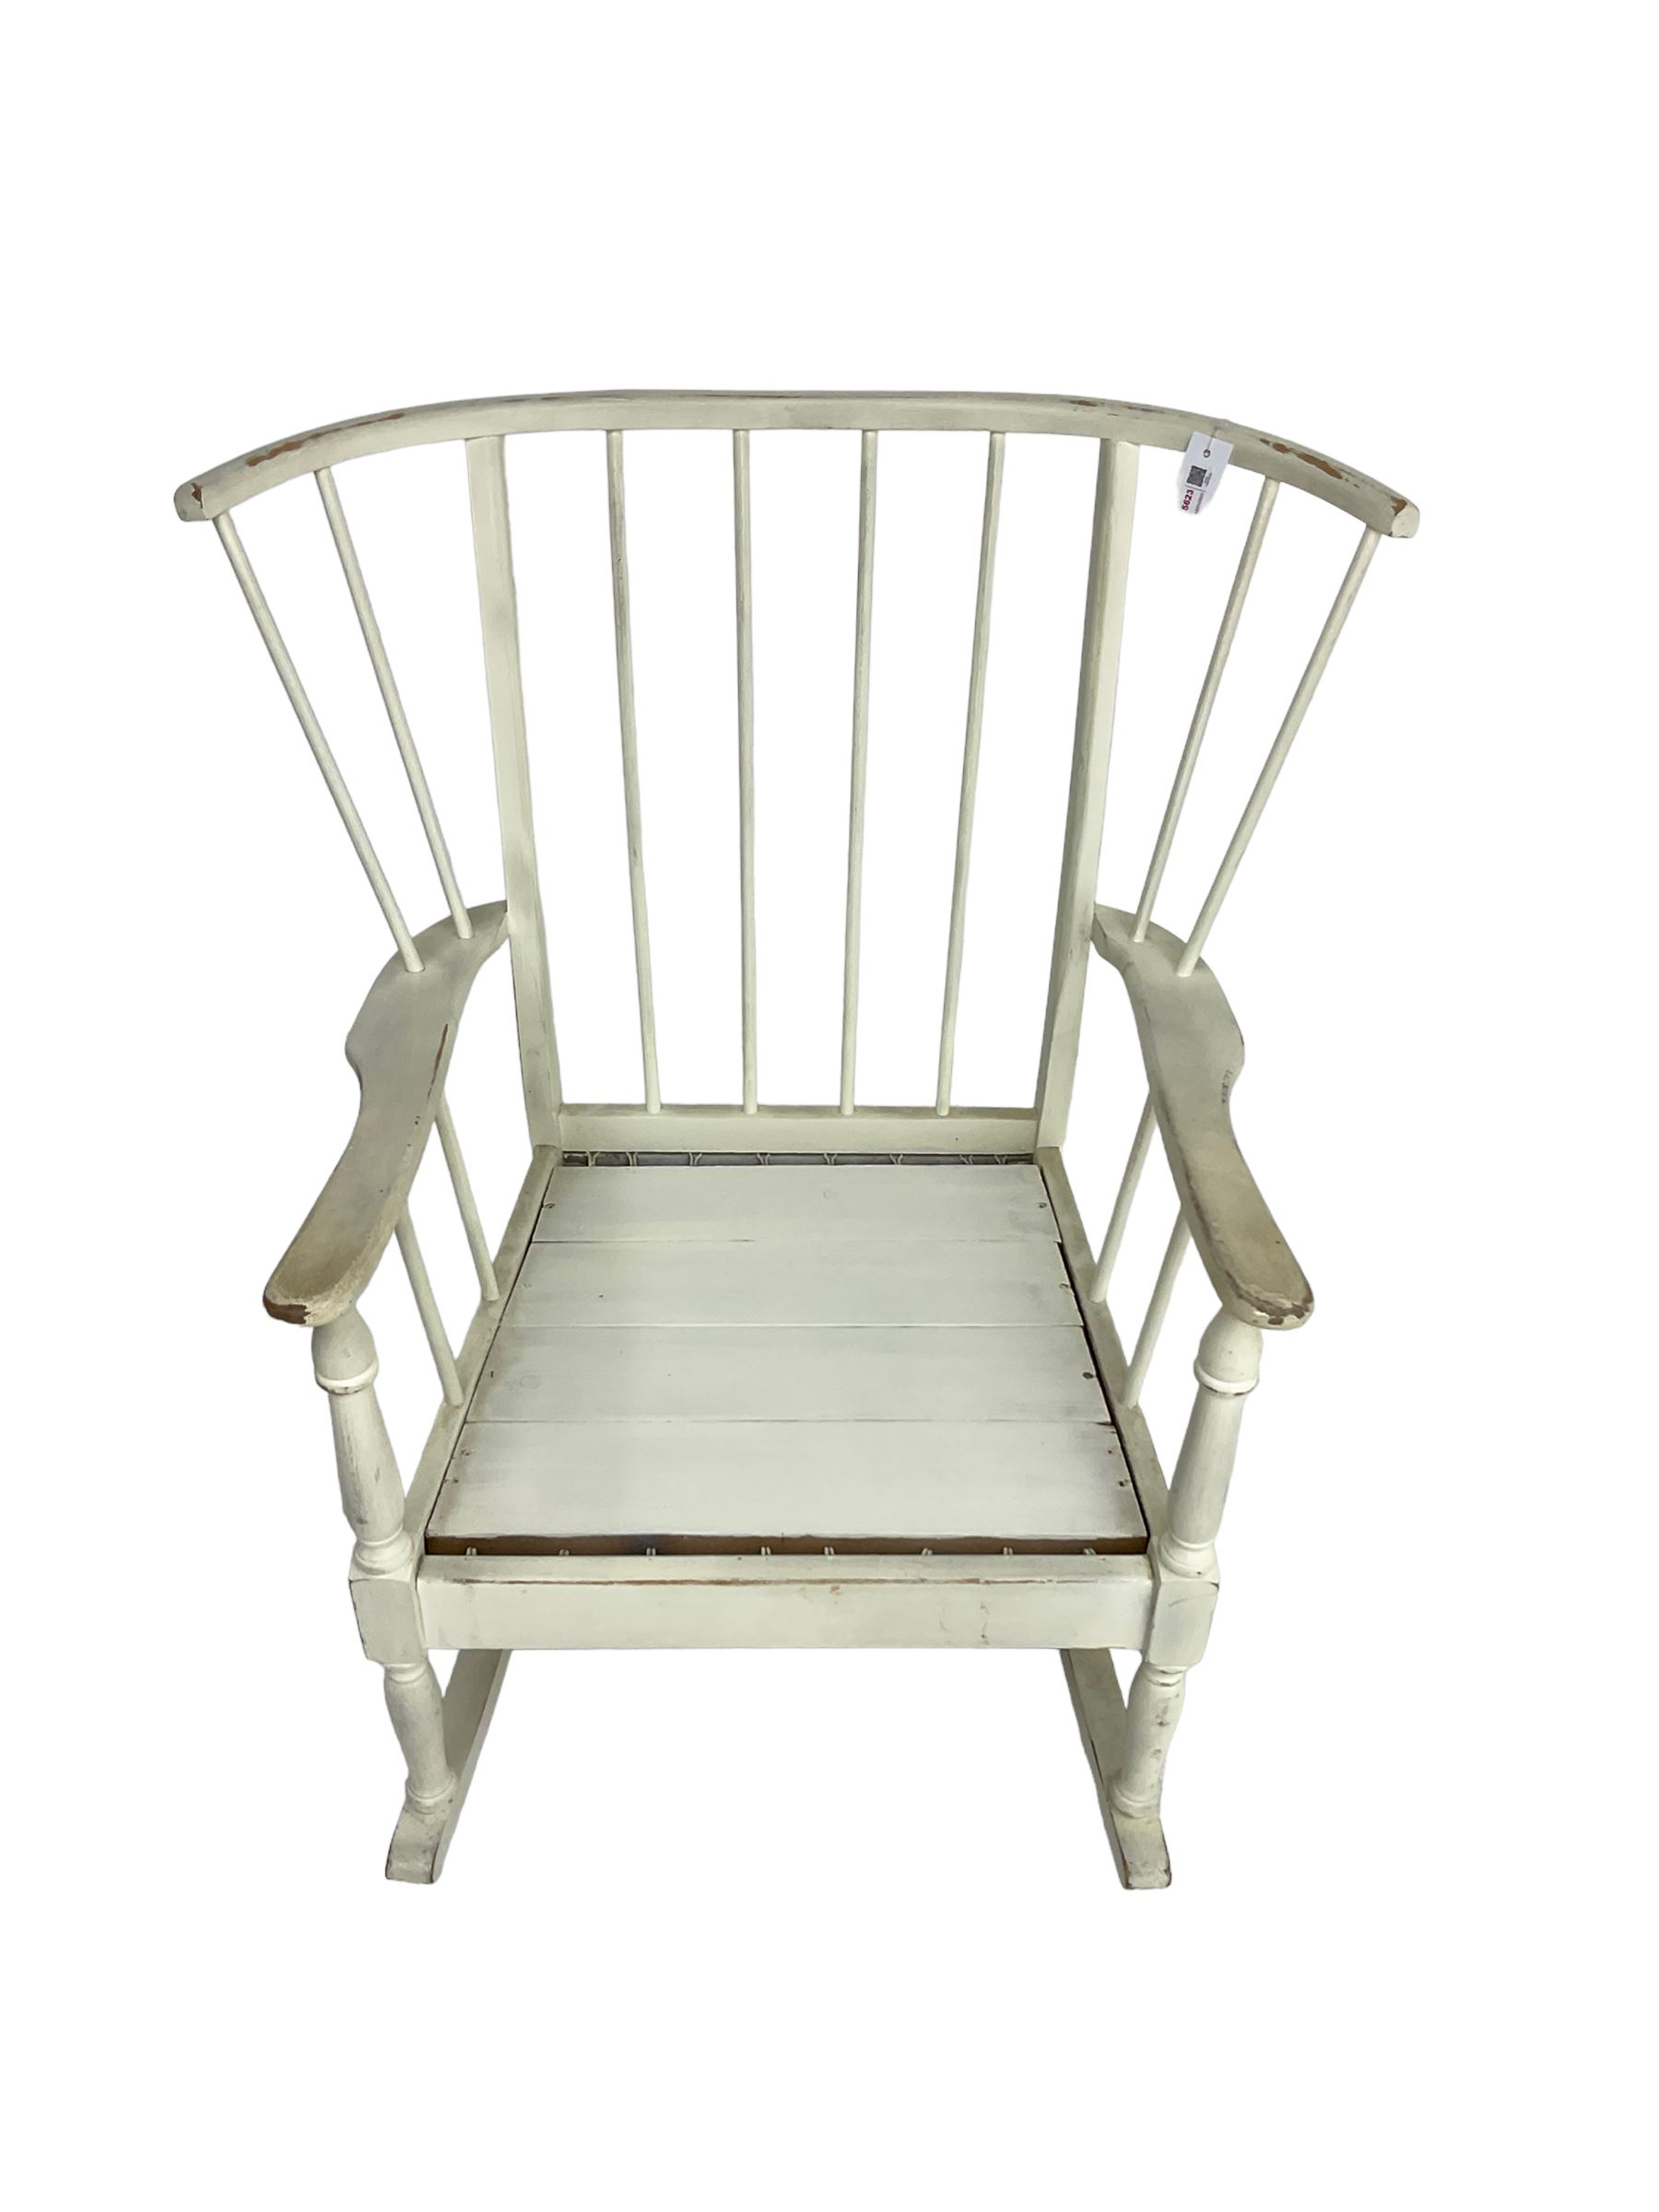 White painted rocking chair - Image 2 of 3